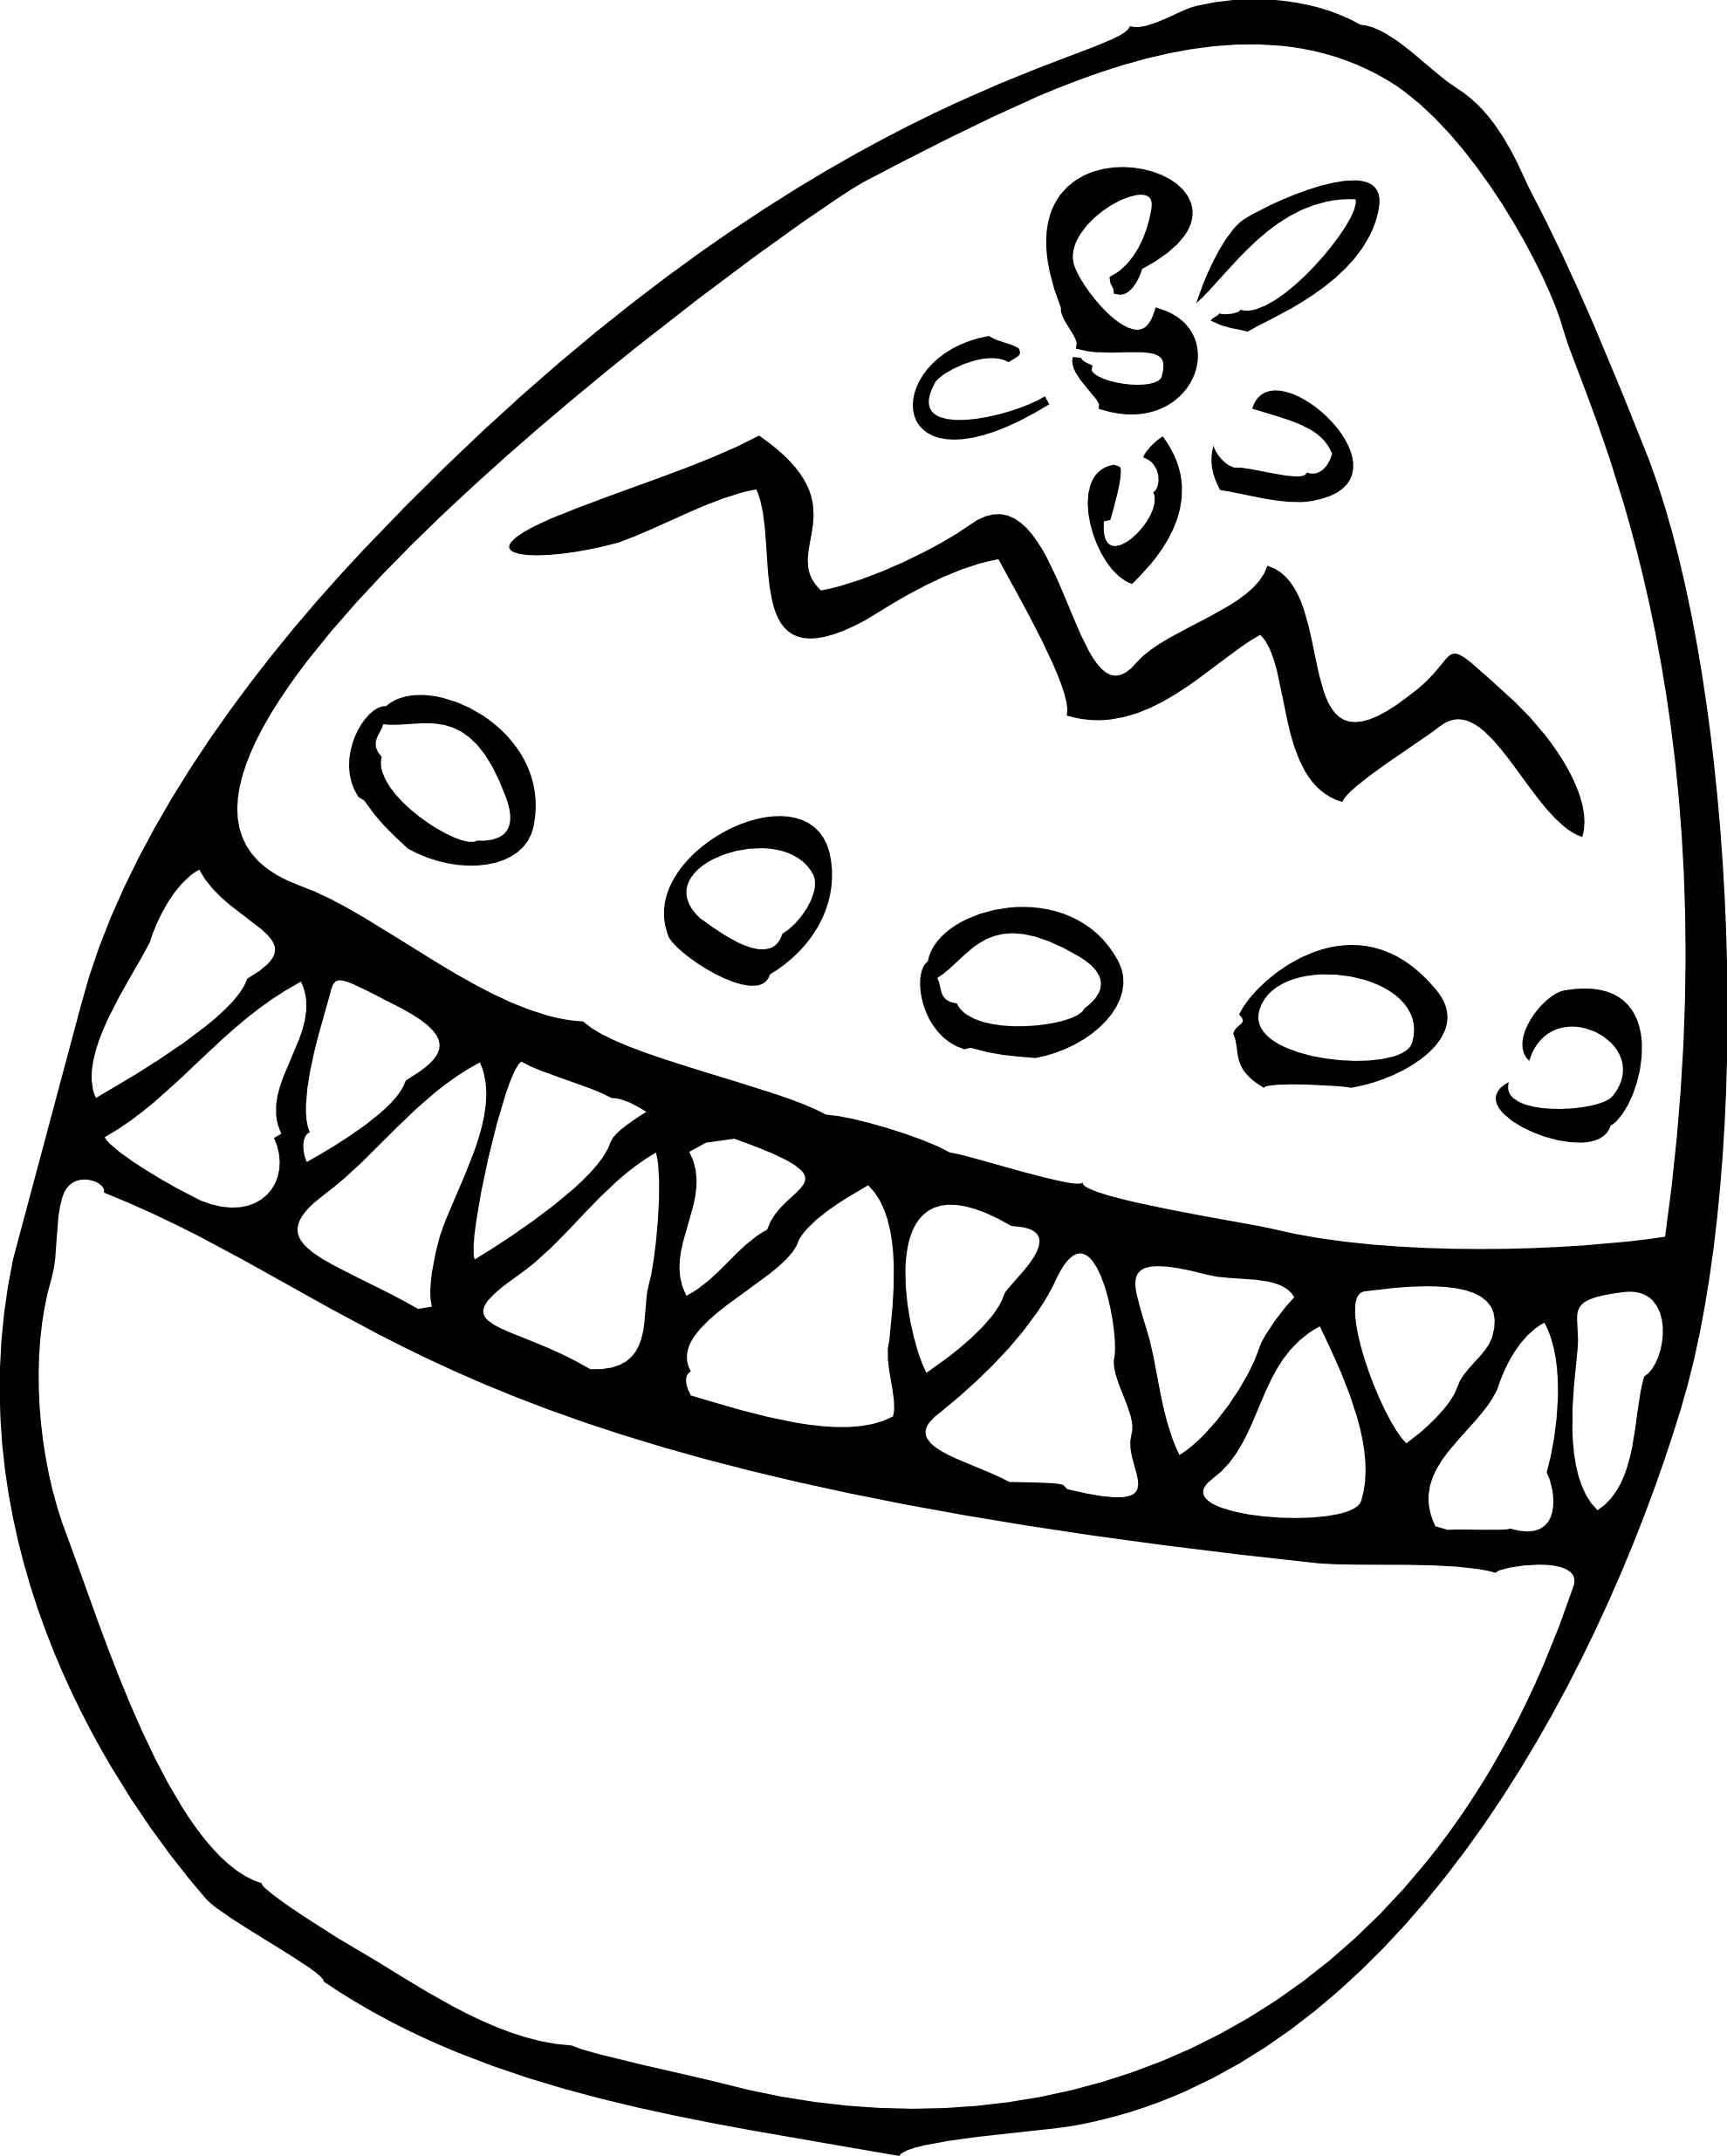 Wet clipart black and white. Cute alligator drawing at